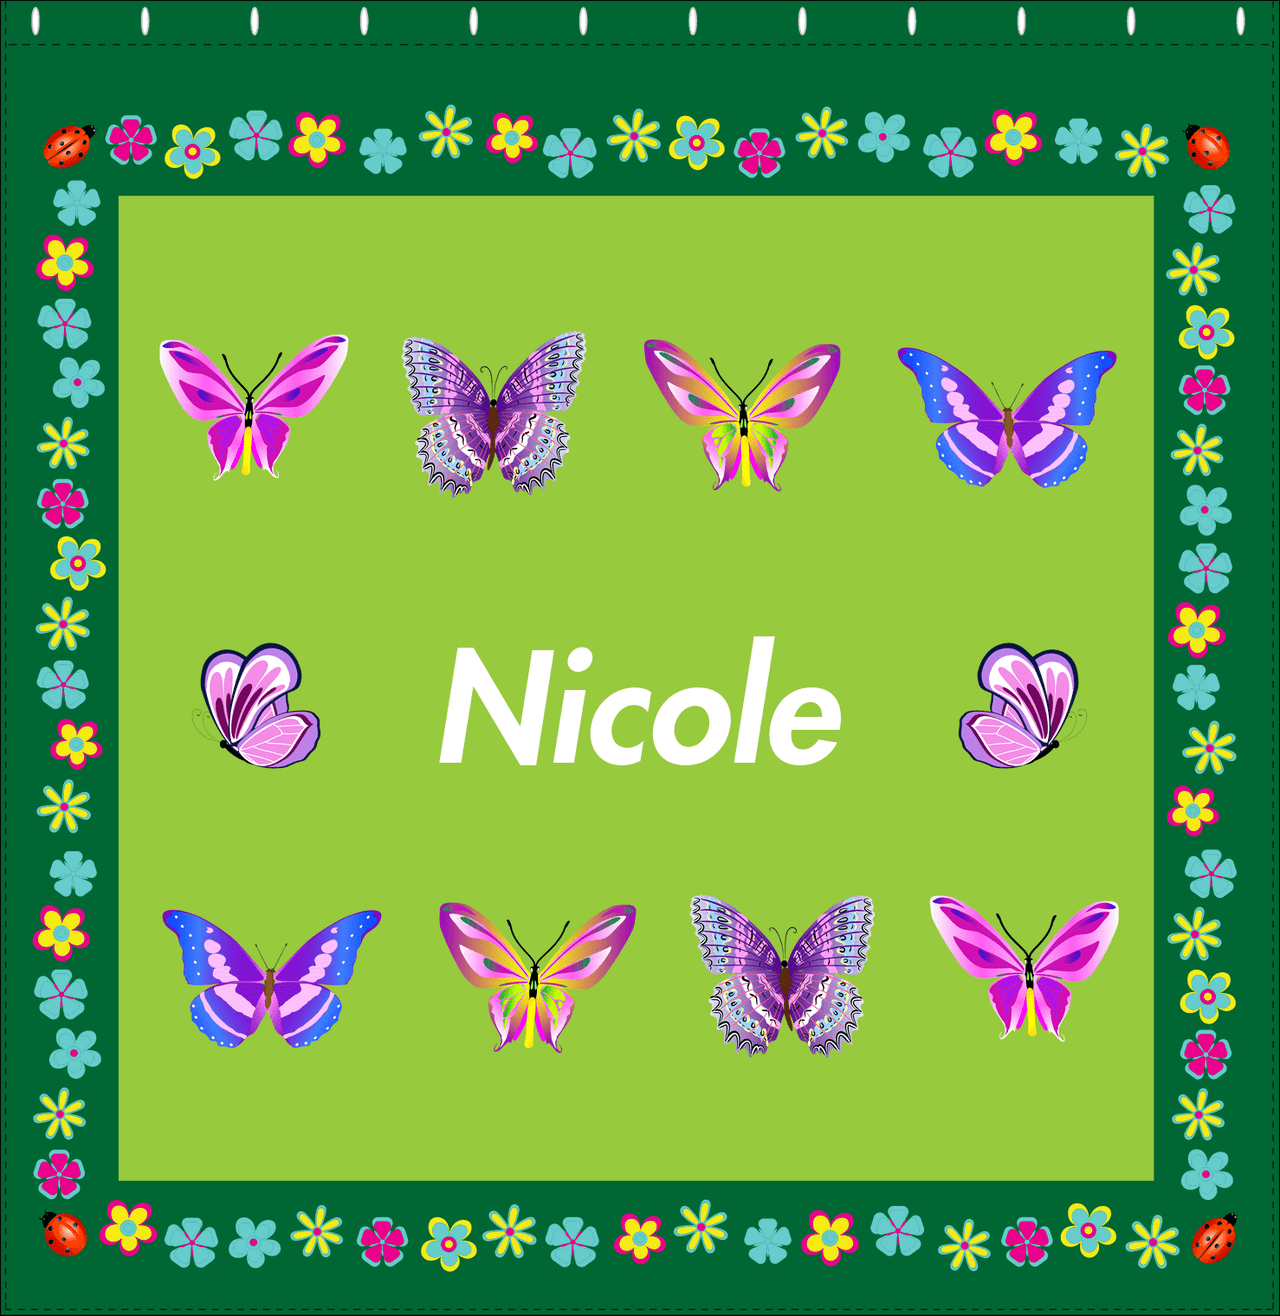 Personalized Butterfly Shower Curtain X - Green Background - Butterflies IV - Decorate View